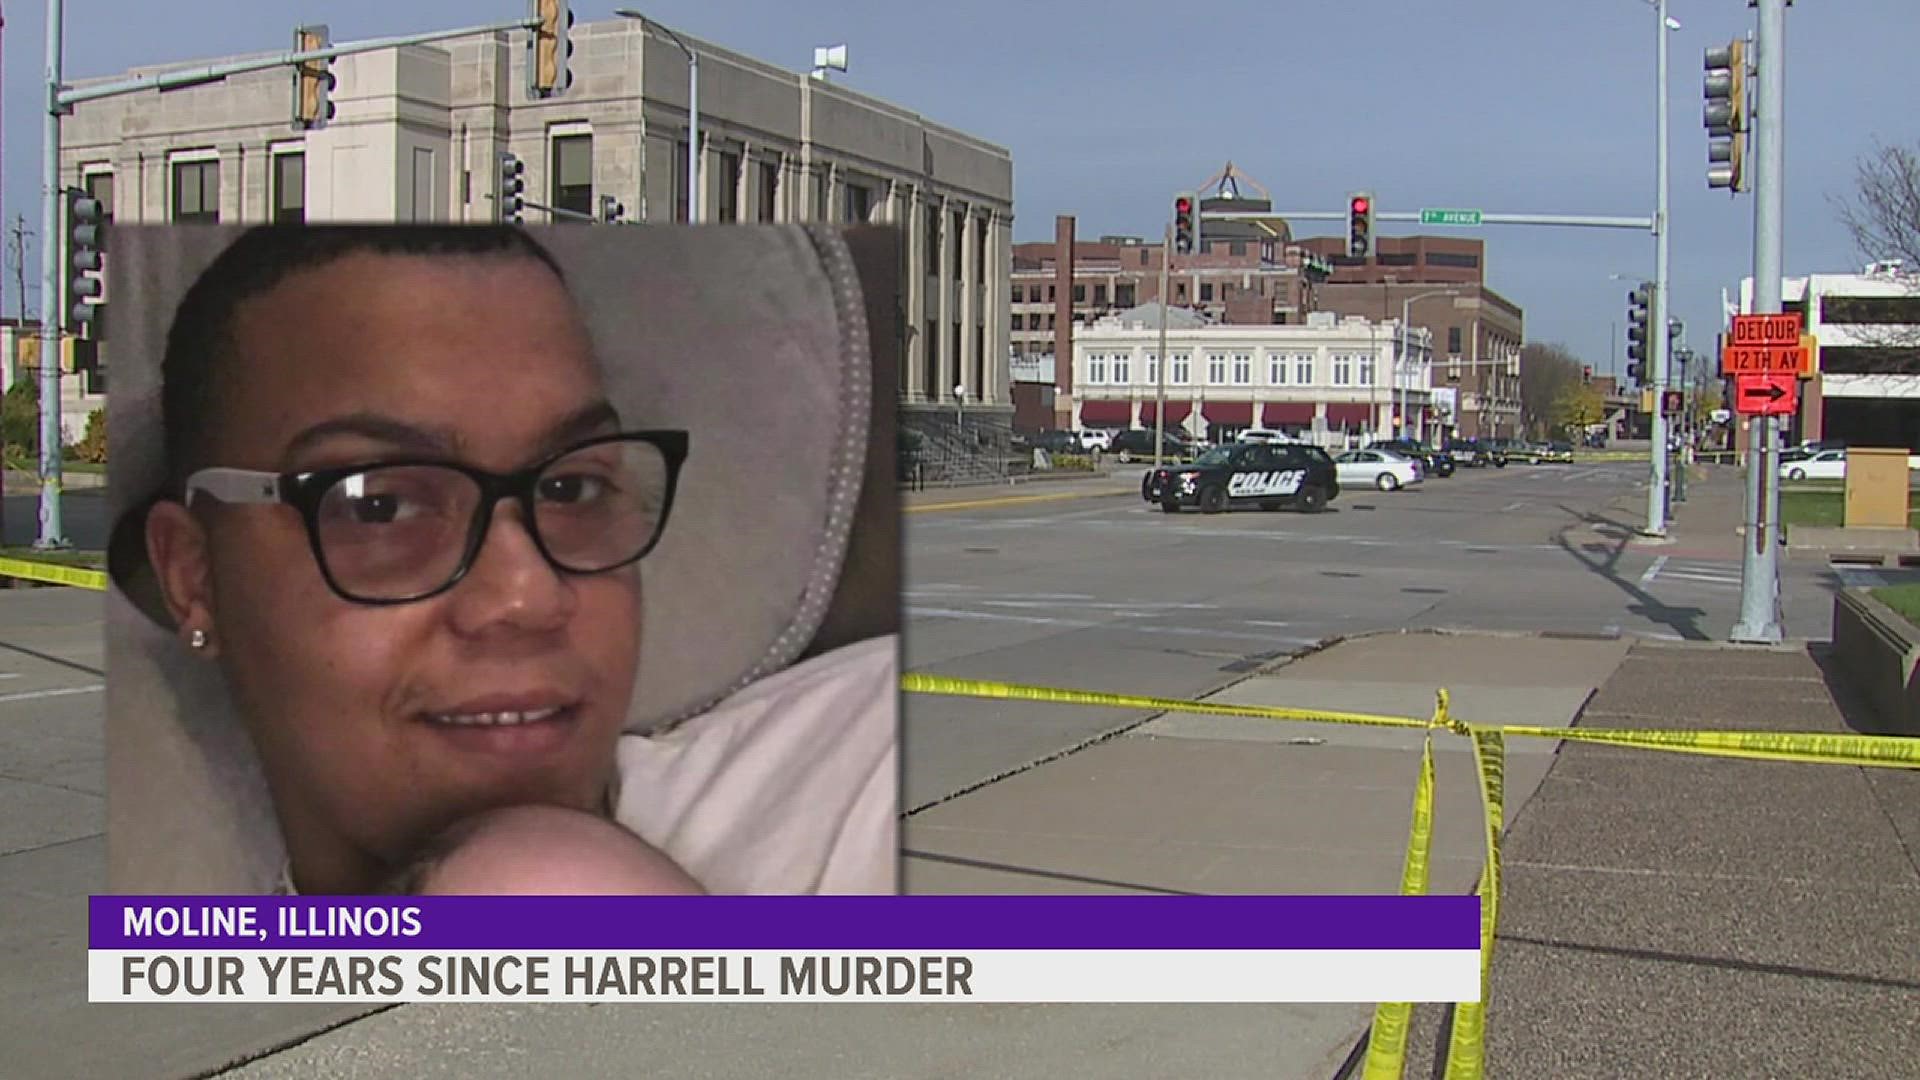 It's been four years since Corey Harrell Jr. was shot and killed in front of Moline City Hall, and the reward for information has increased to $20,000.